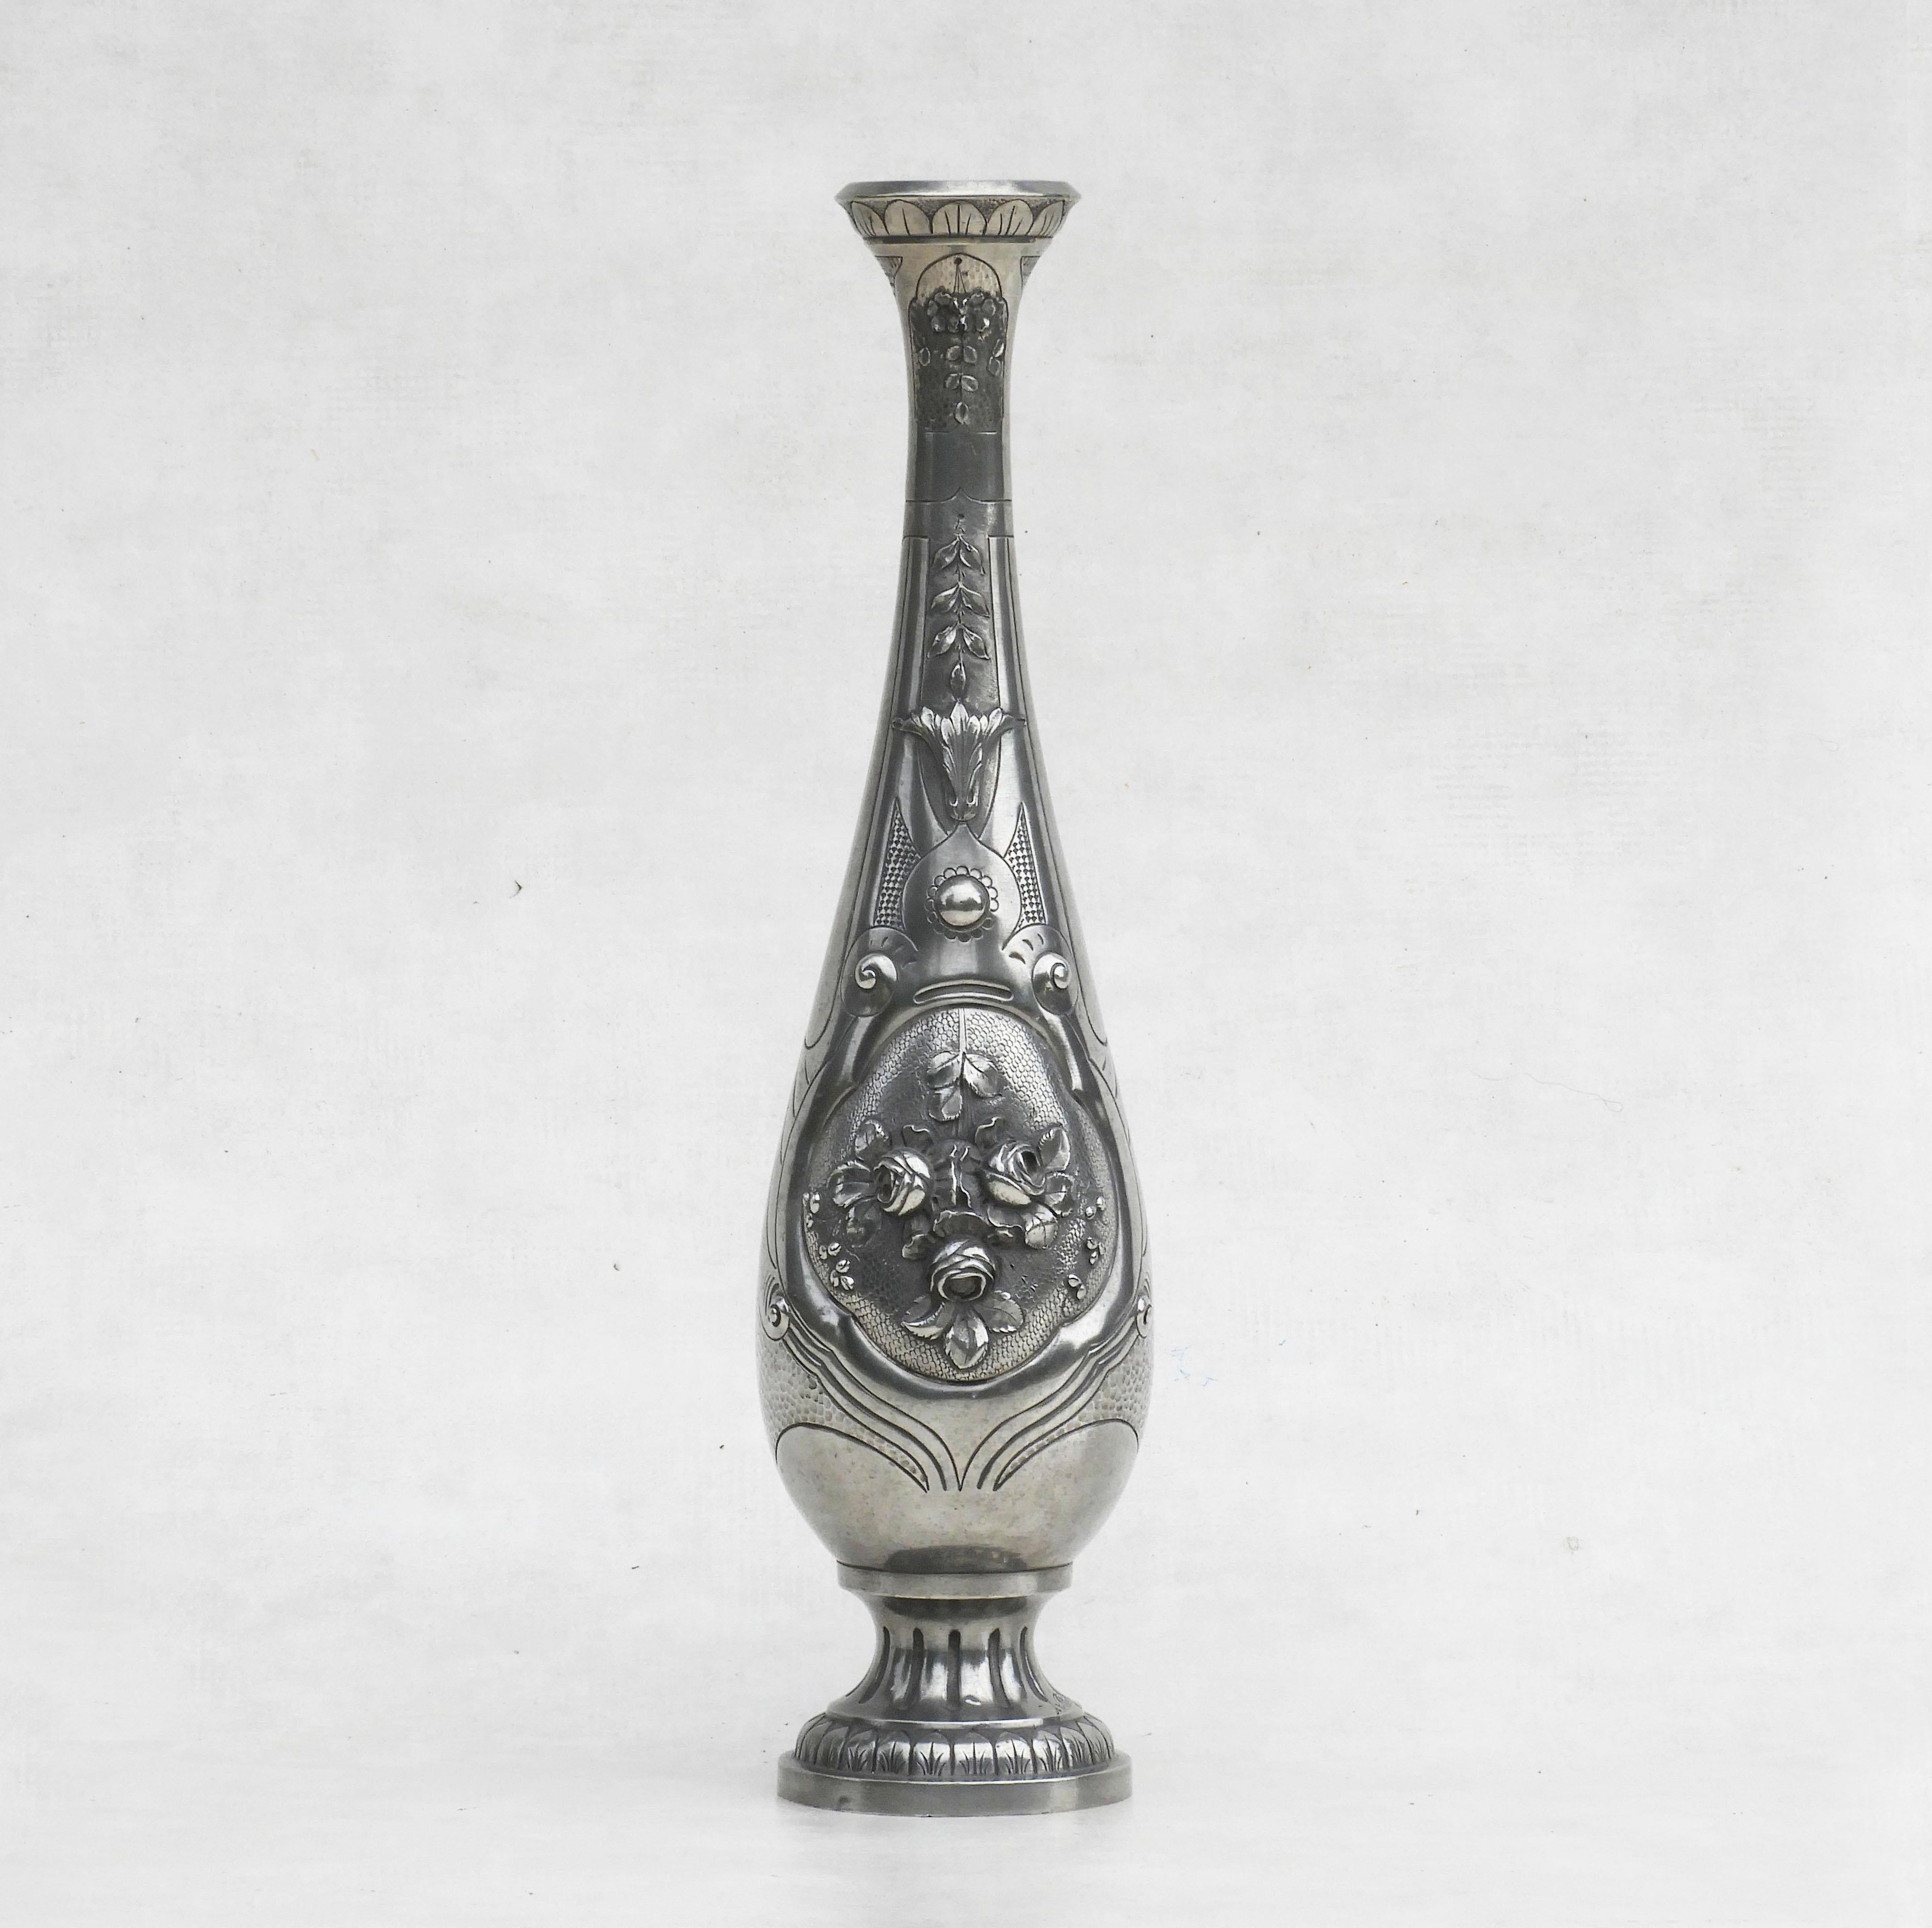 Monumental Belle Epoque vase by André Villien c1900


Beautiful Belle Époque pewter vase by French sculptor André Villien, c1900.

Tall, symmetrical, floral-themed vase, wonderfully embossed and engraved with rose blooms and foliage.

Signed